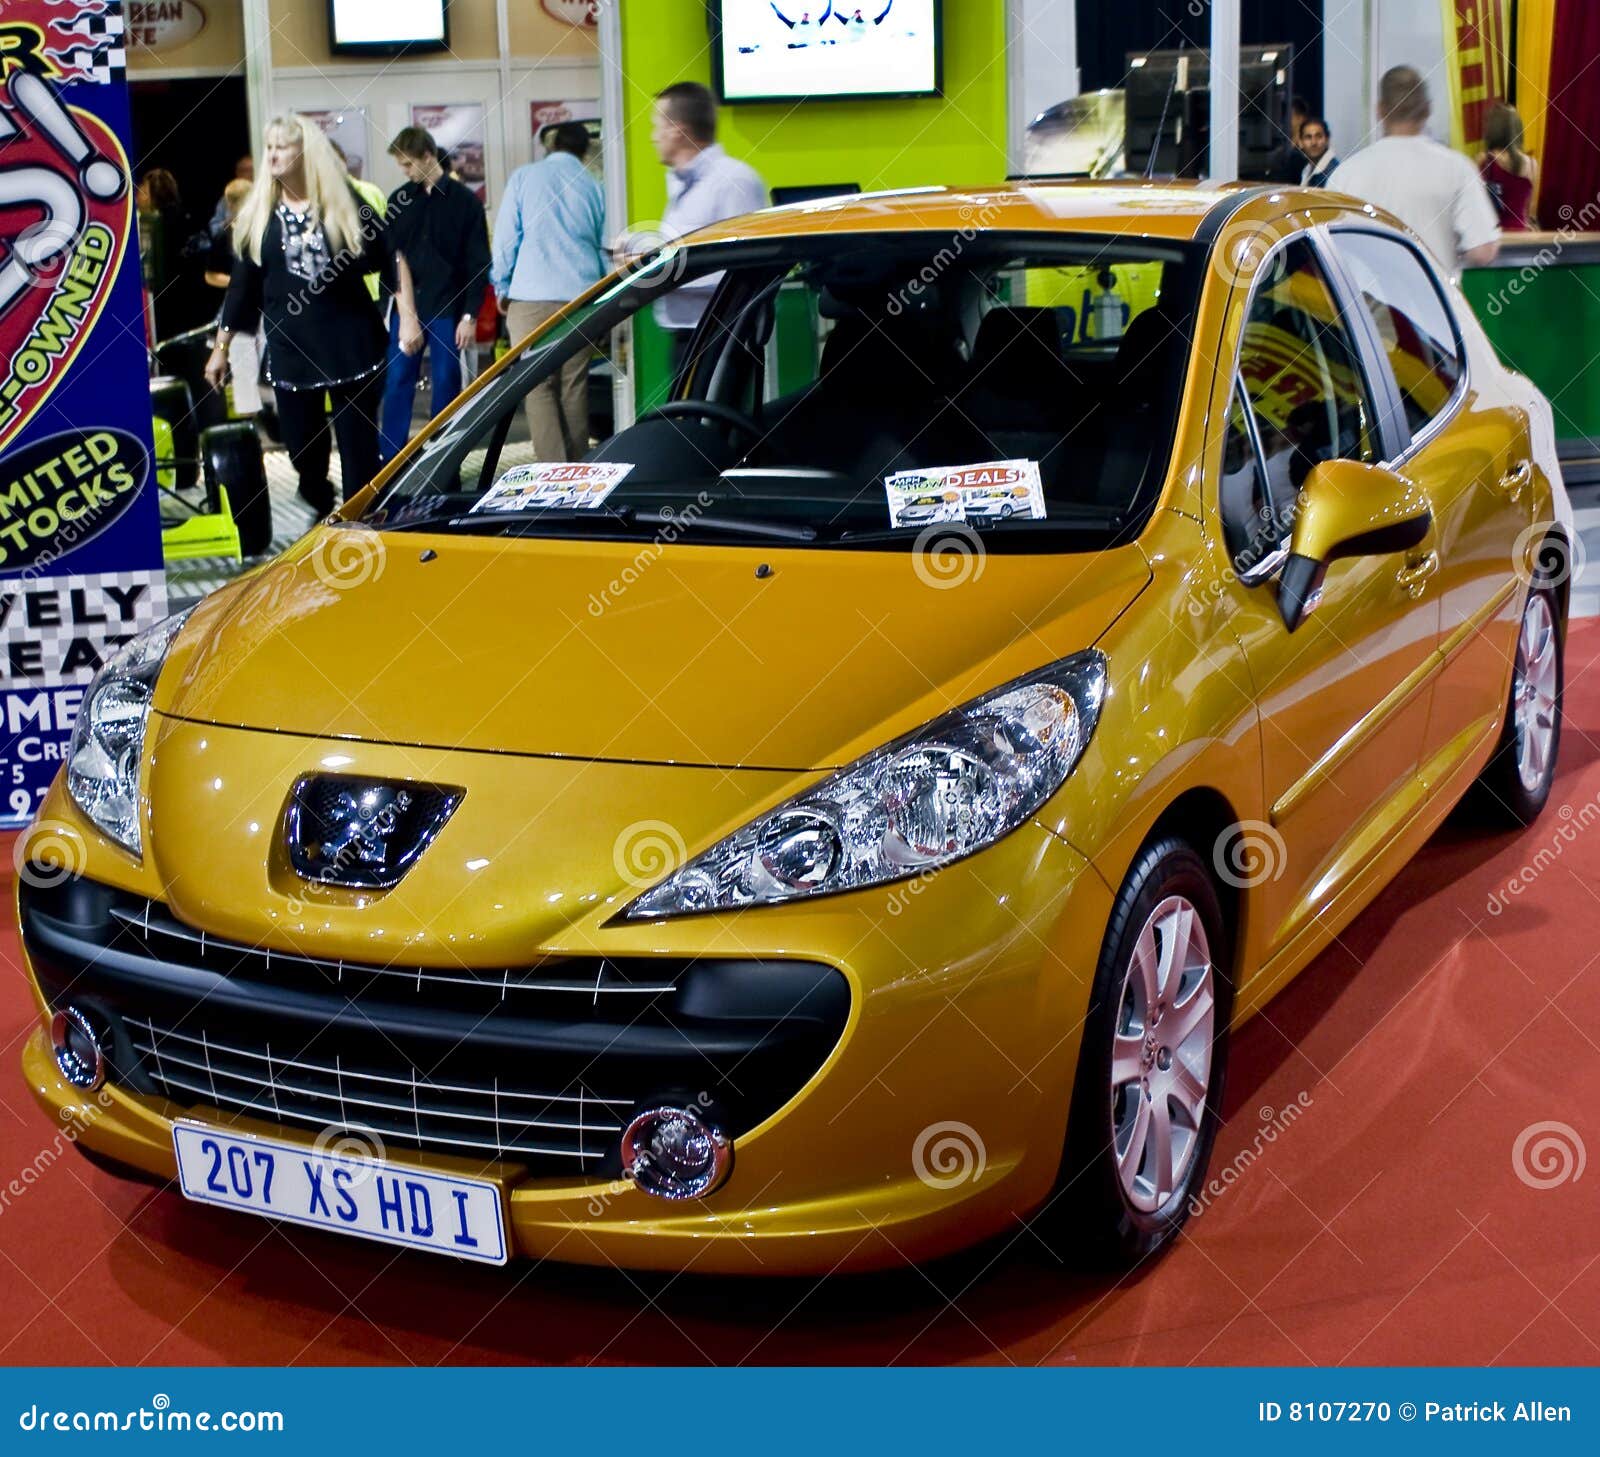 Yellow Peugeot 207 XS 1.6 HDi Editorial Image - Image of bright